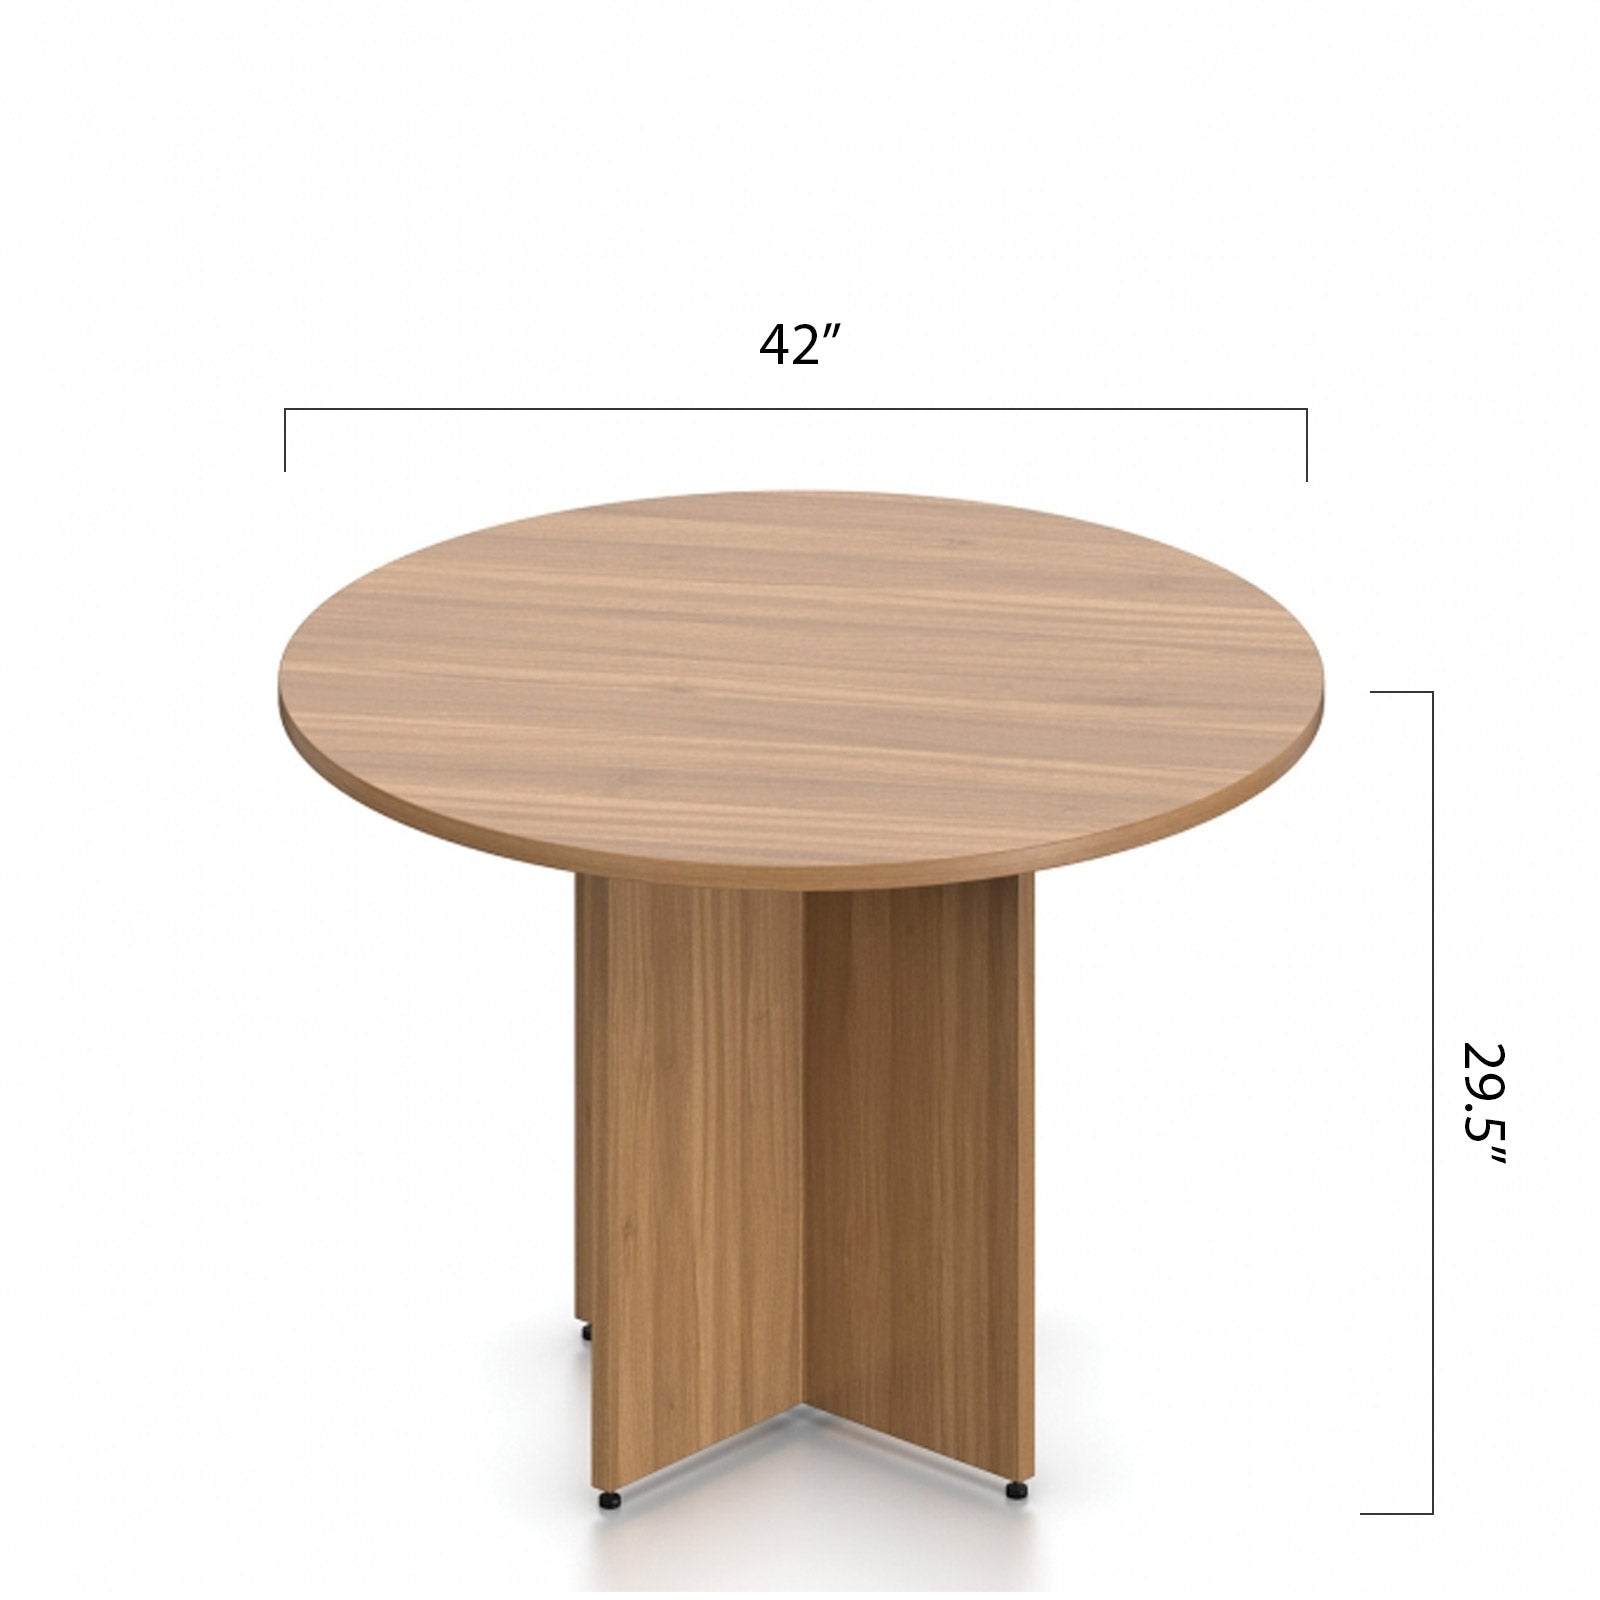 36", 42" Round Table and Chair Set (G11642B)